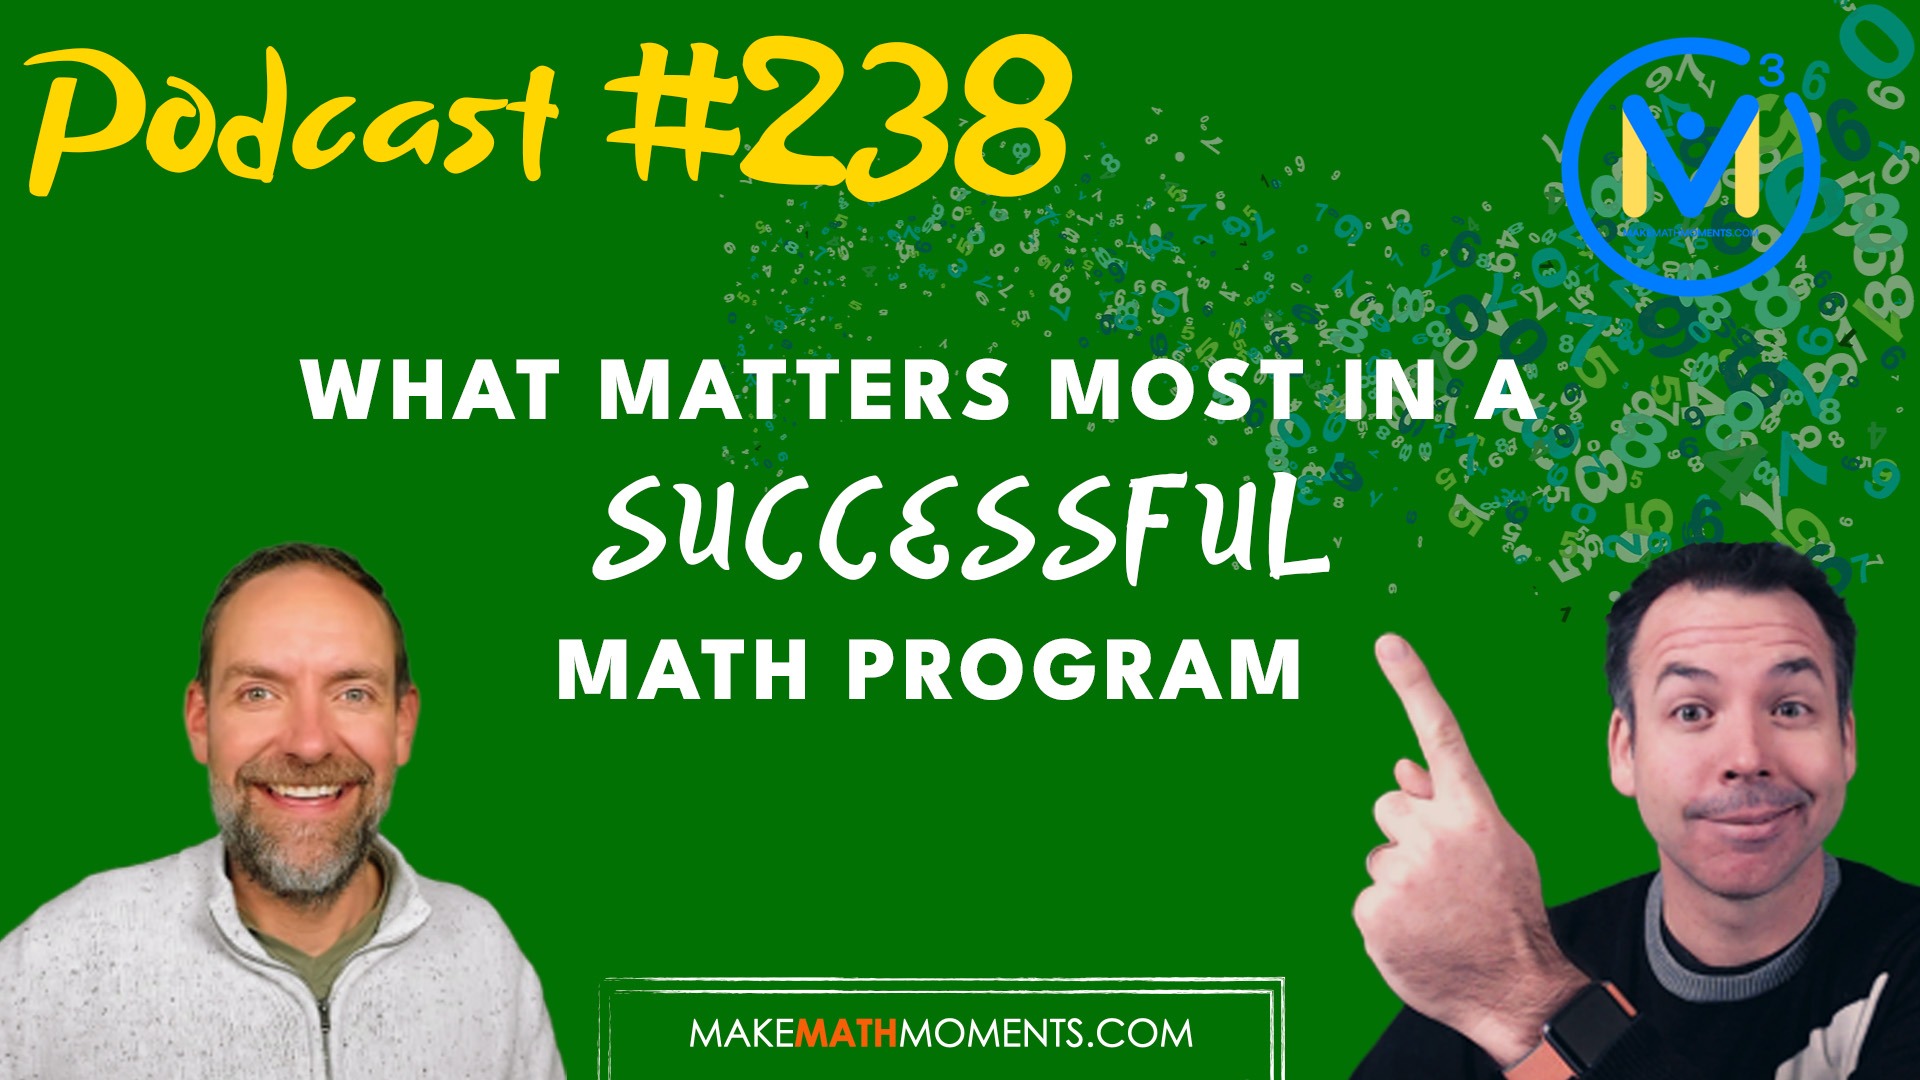 Episode 238: What Matters Most In A Successful Math Program